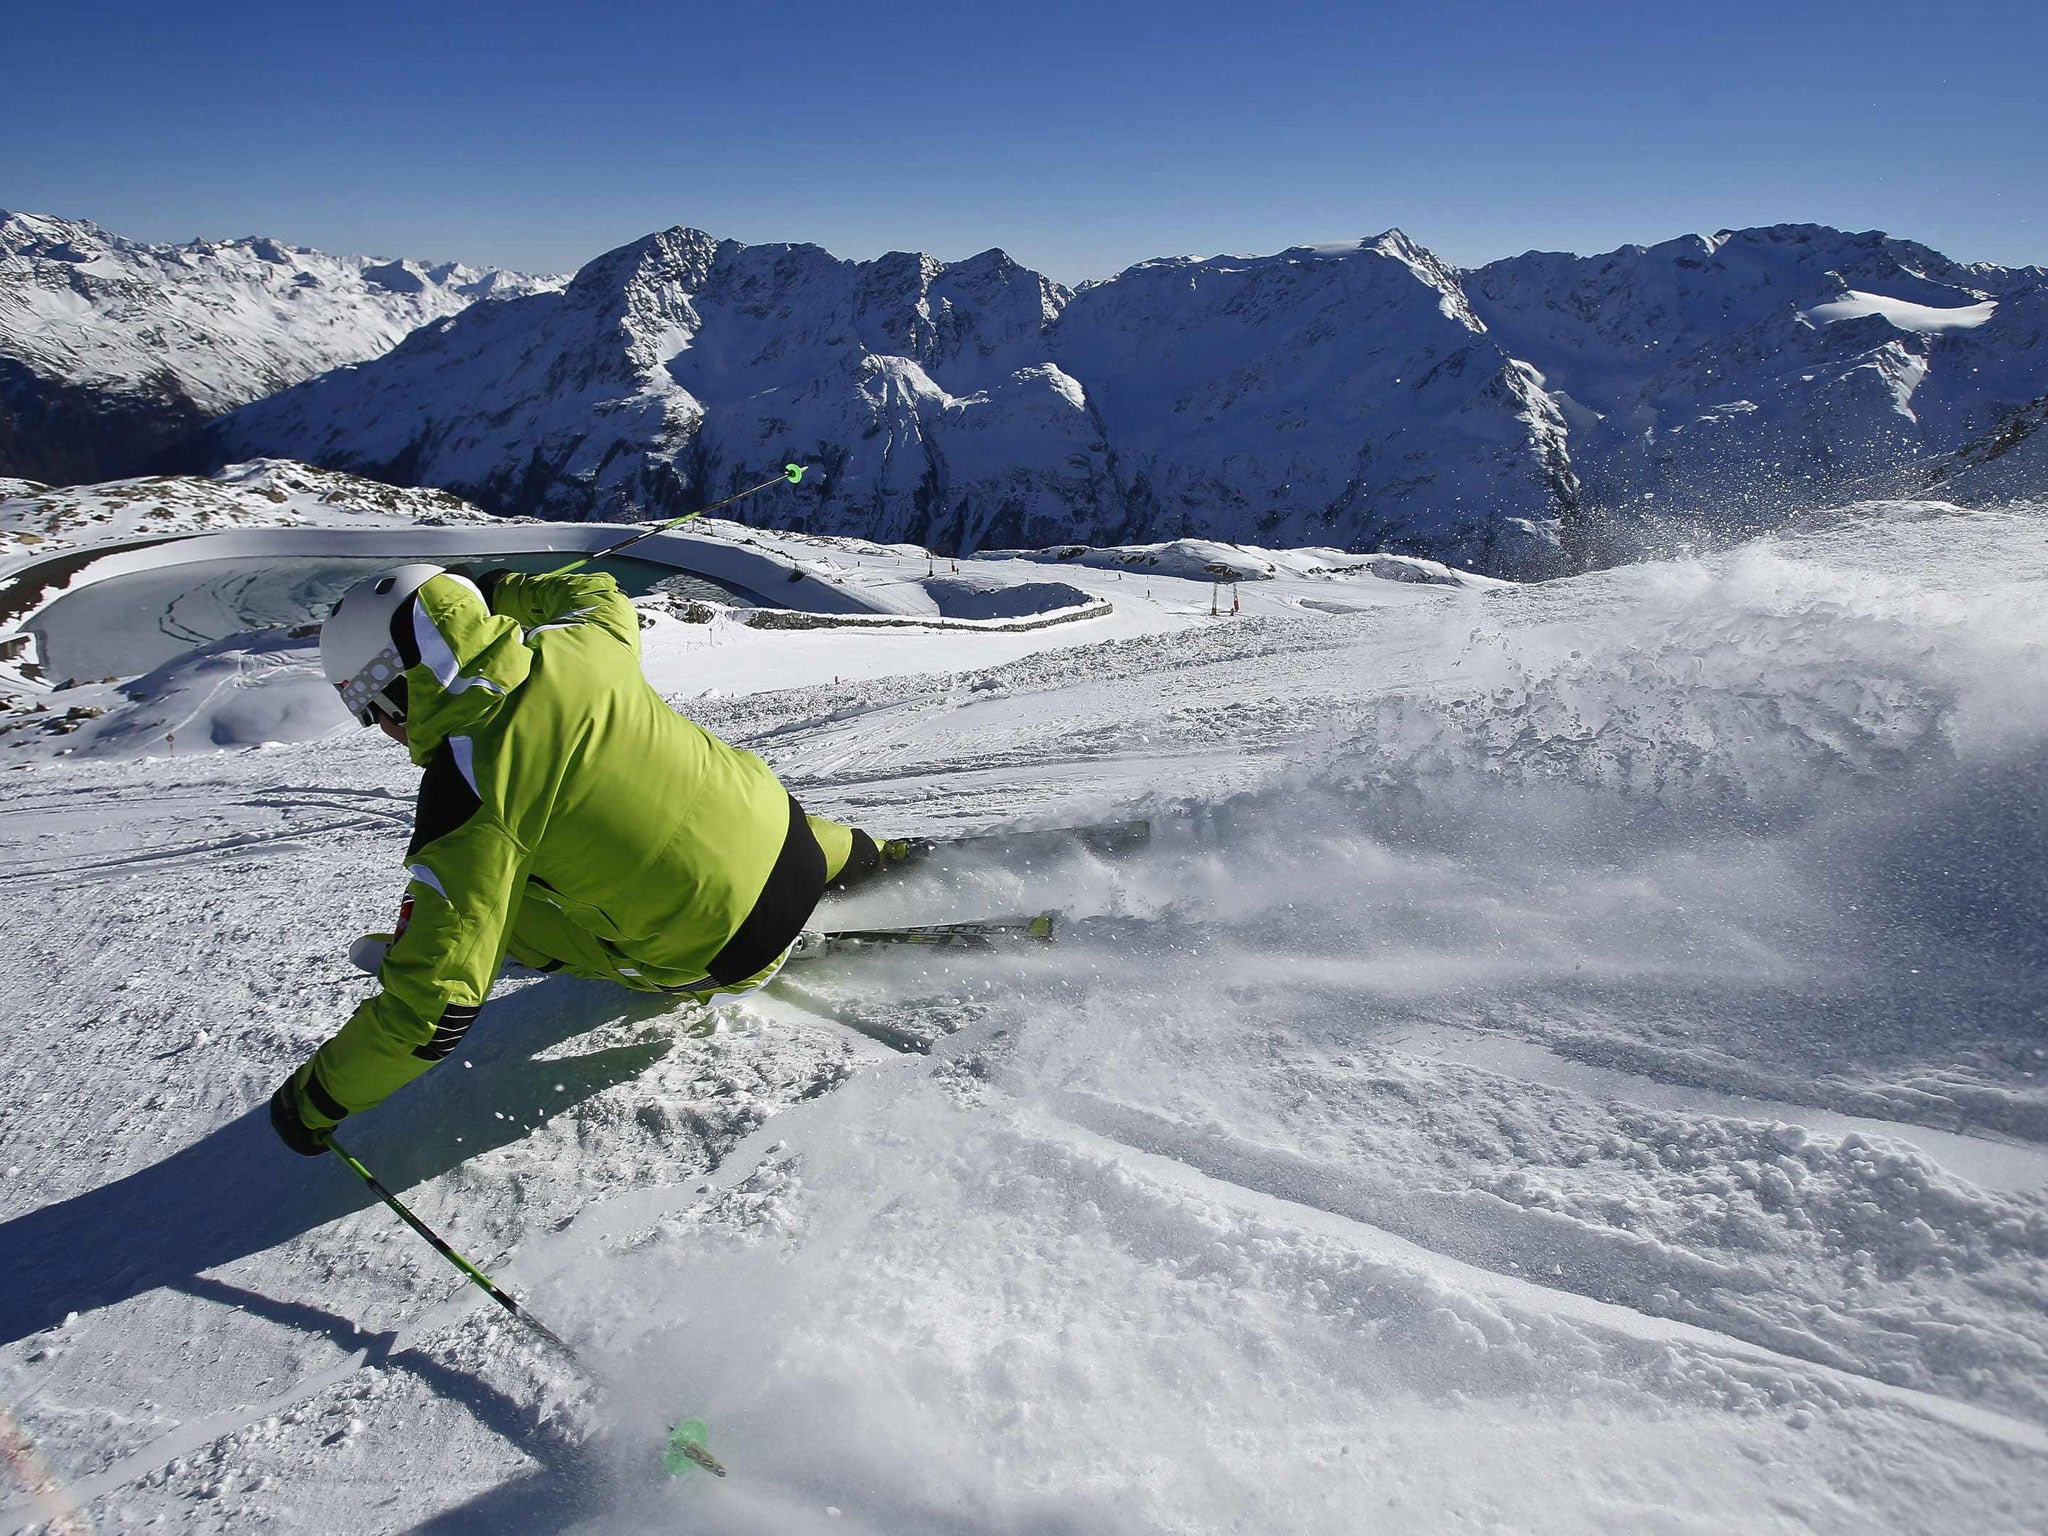 Going downhill? The ski industry hopes for growth